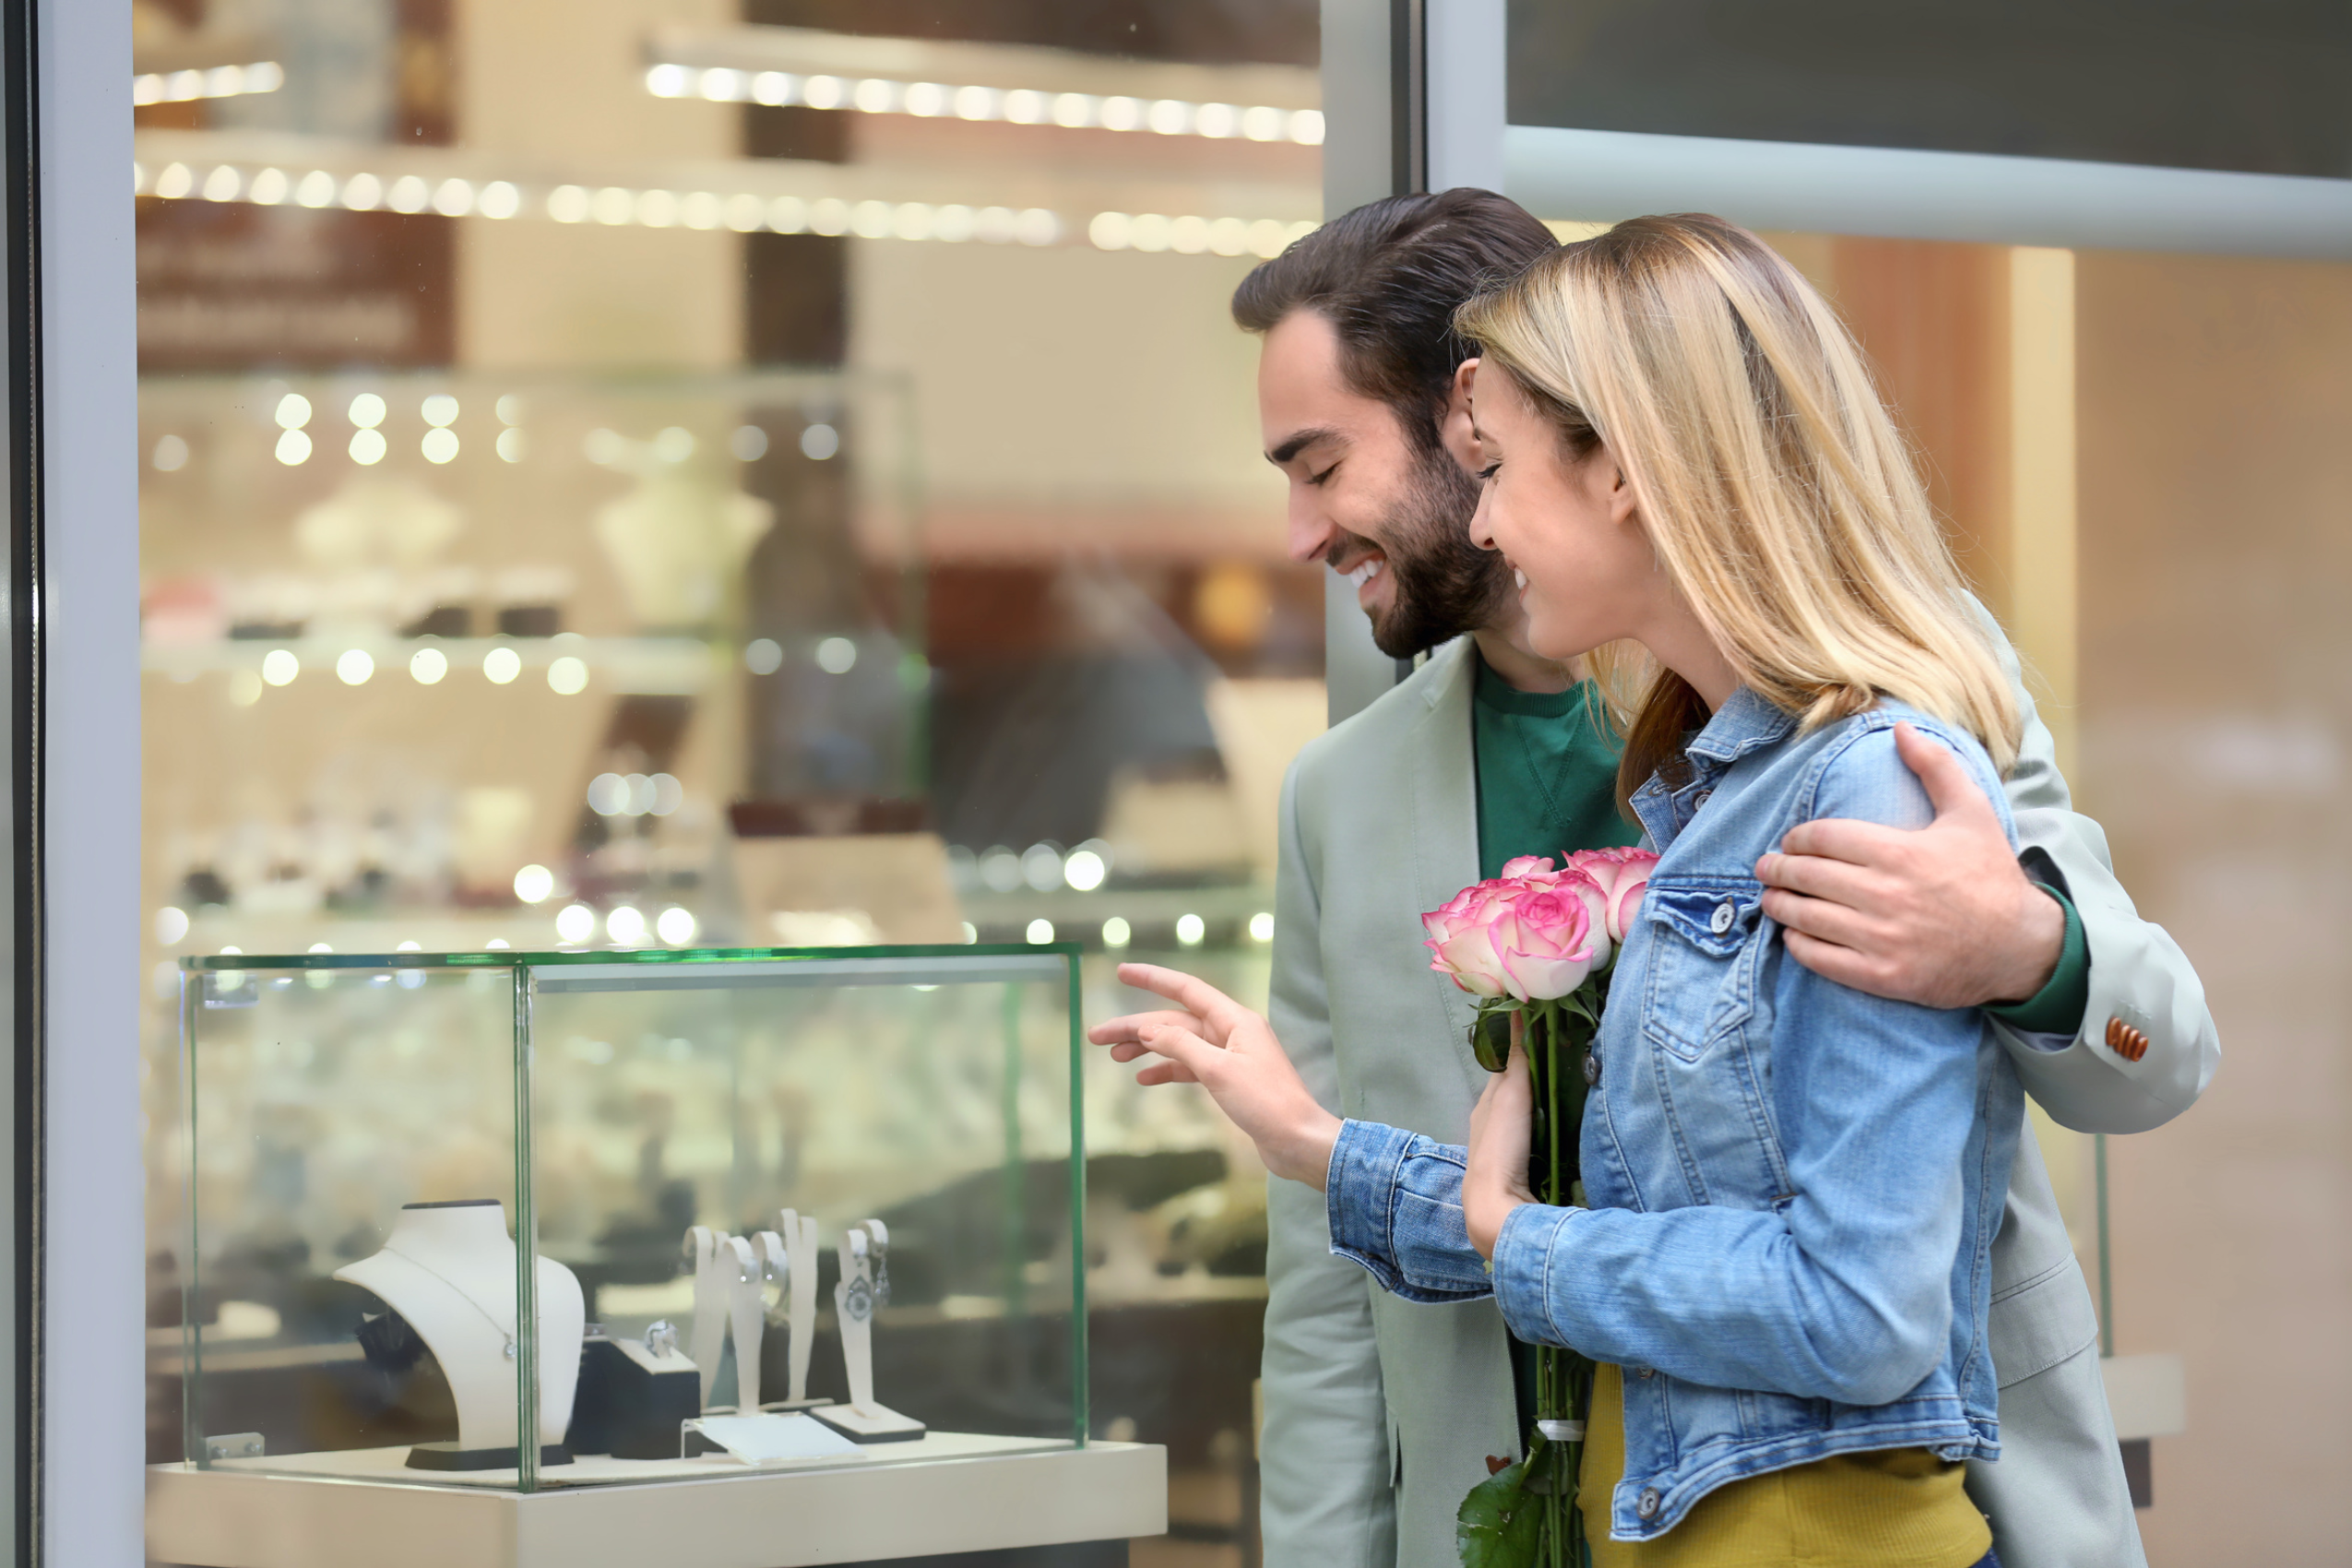 A man and woman look in a glass case at a jewelry store while shopping for bridal rings. The woma holds a bouquet of roses. 